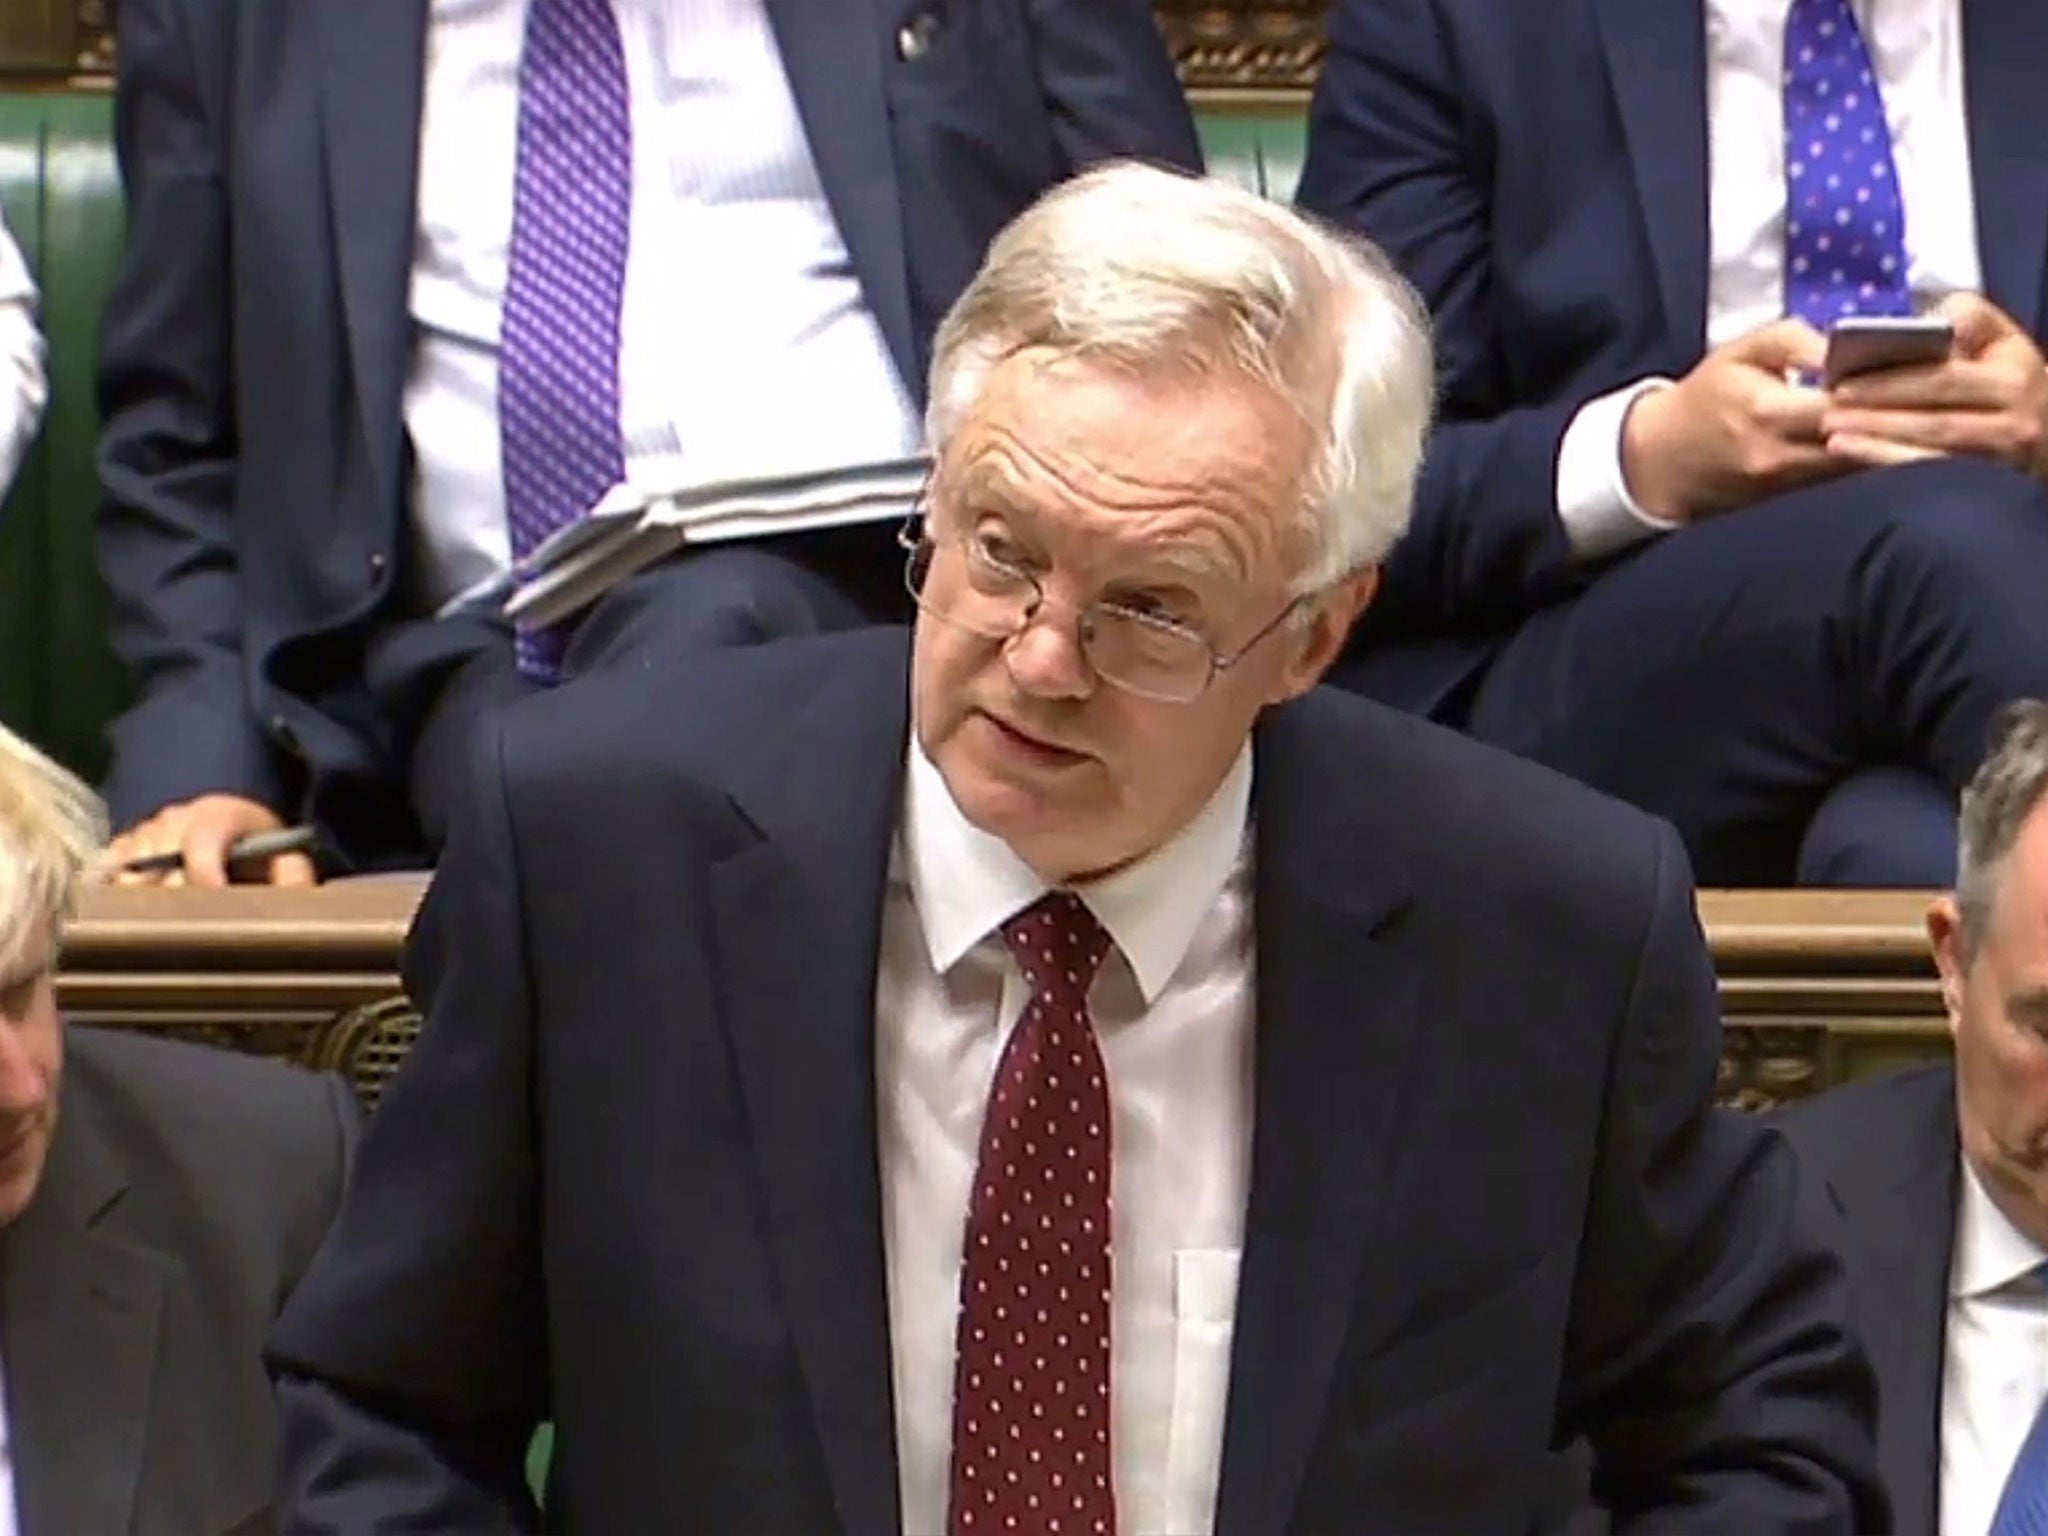 David Davis’s speech to Parliament yesterday was notable for being rather short on detail